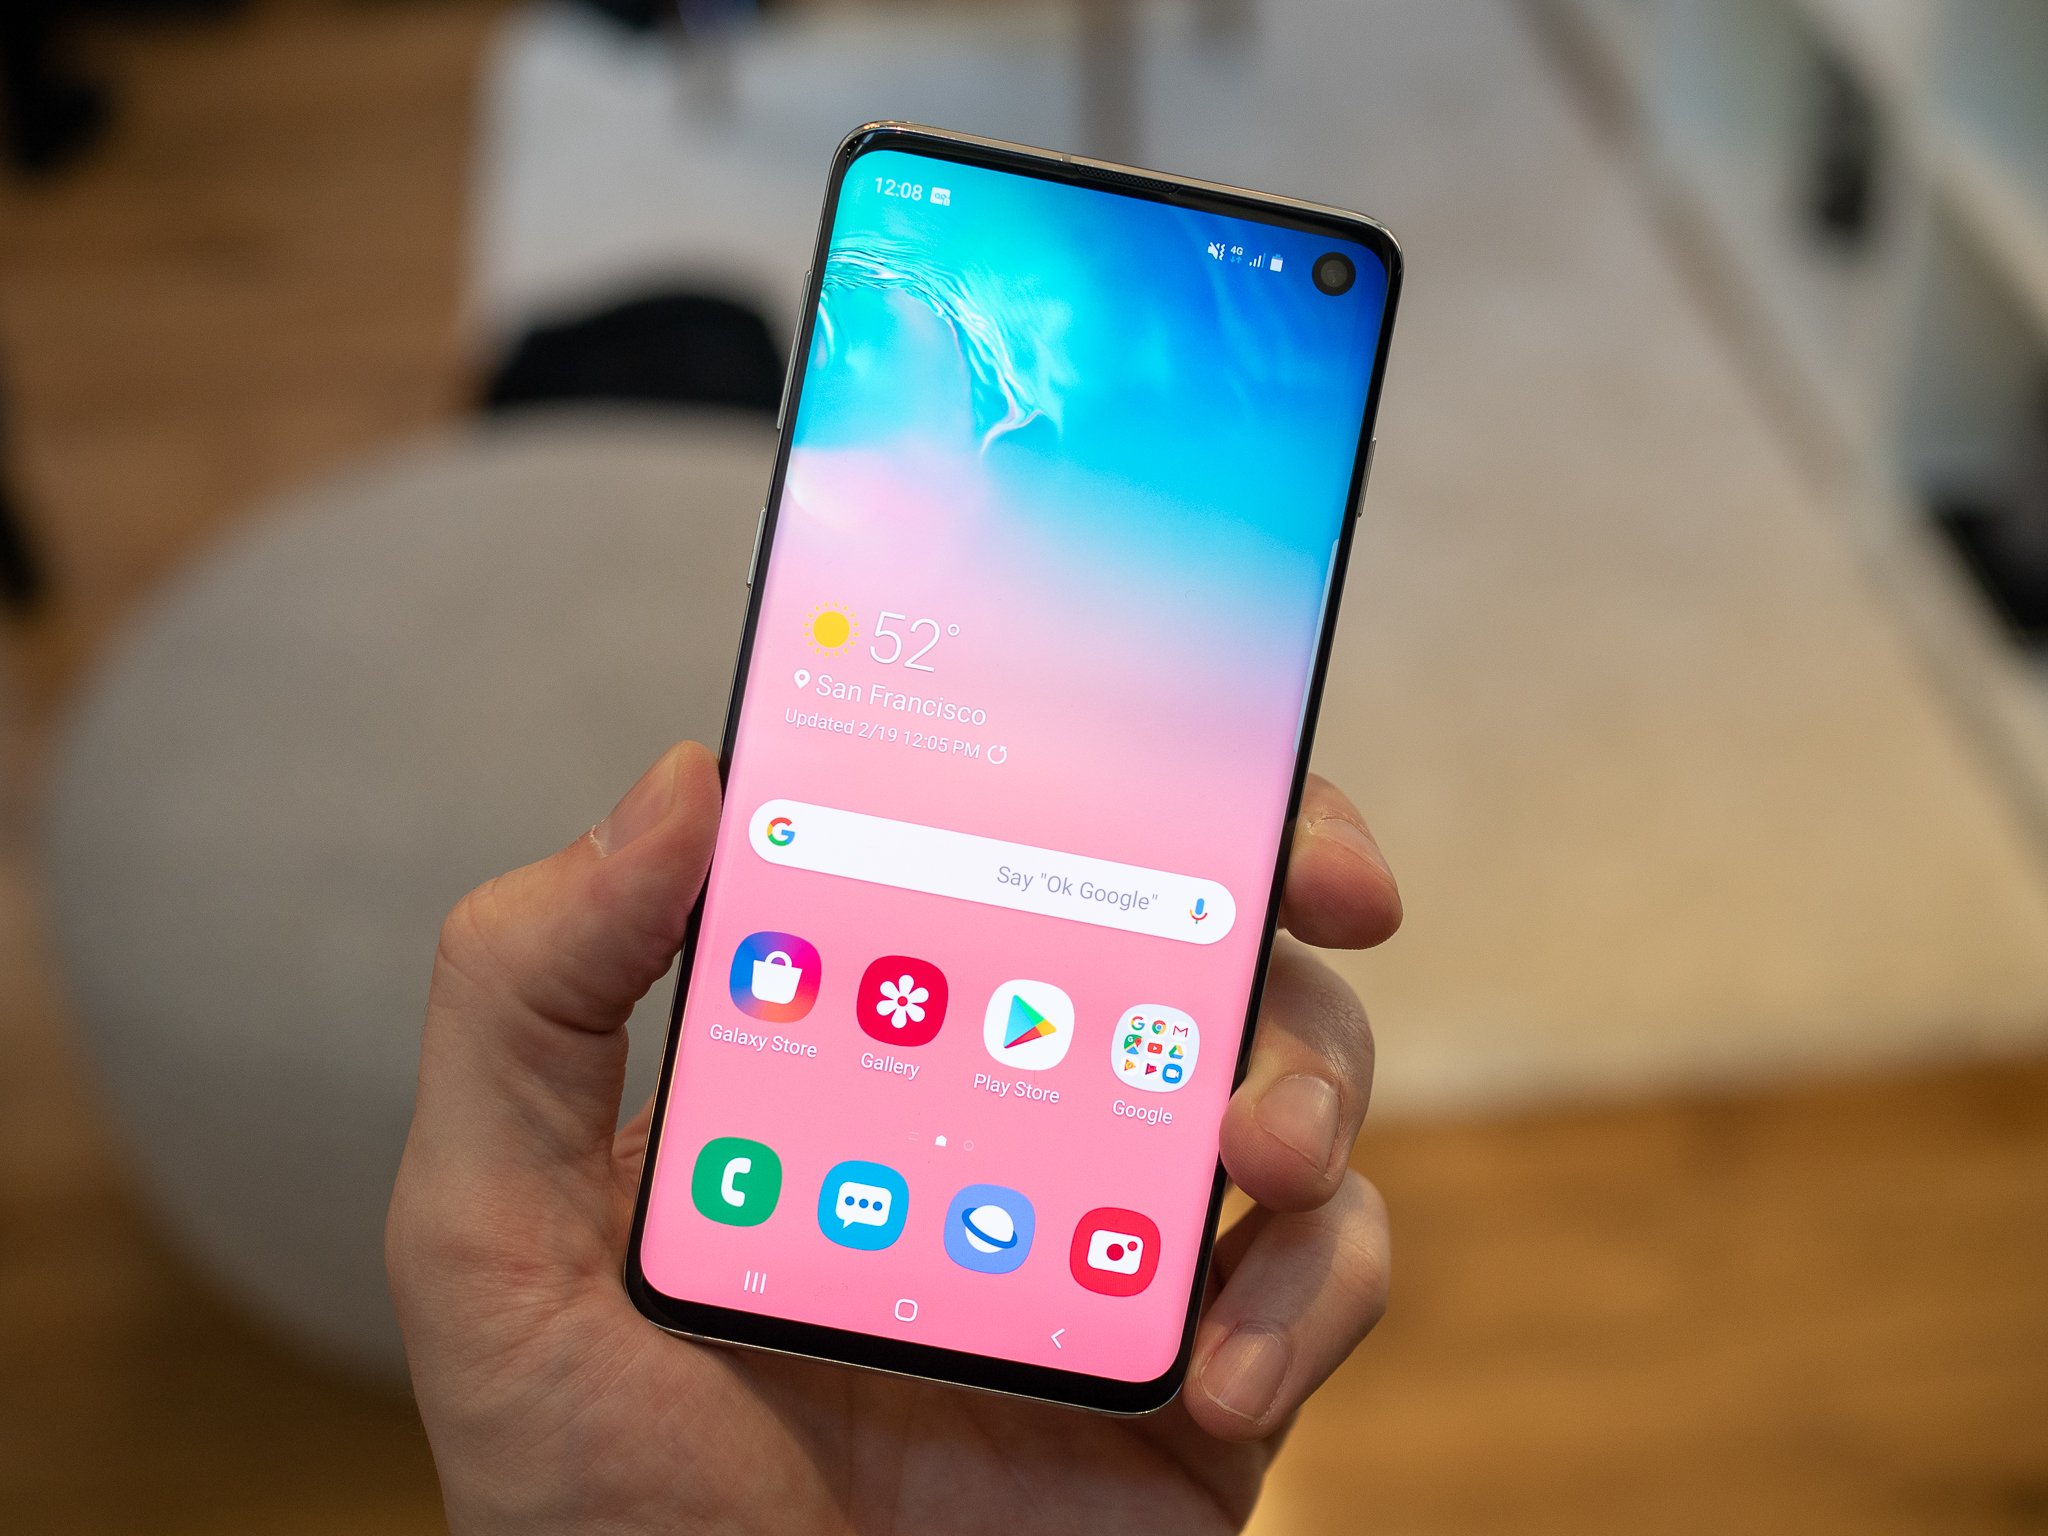 https://www.androidcentral.com/sites/androidcentral.com/files/styles/large_wm_brw/public/article_images/2019/02/galaxy-s10-home-screen-blank.jpg?itok=ufnugHMY